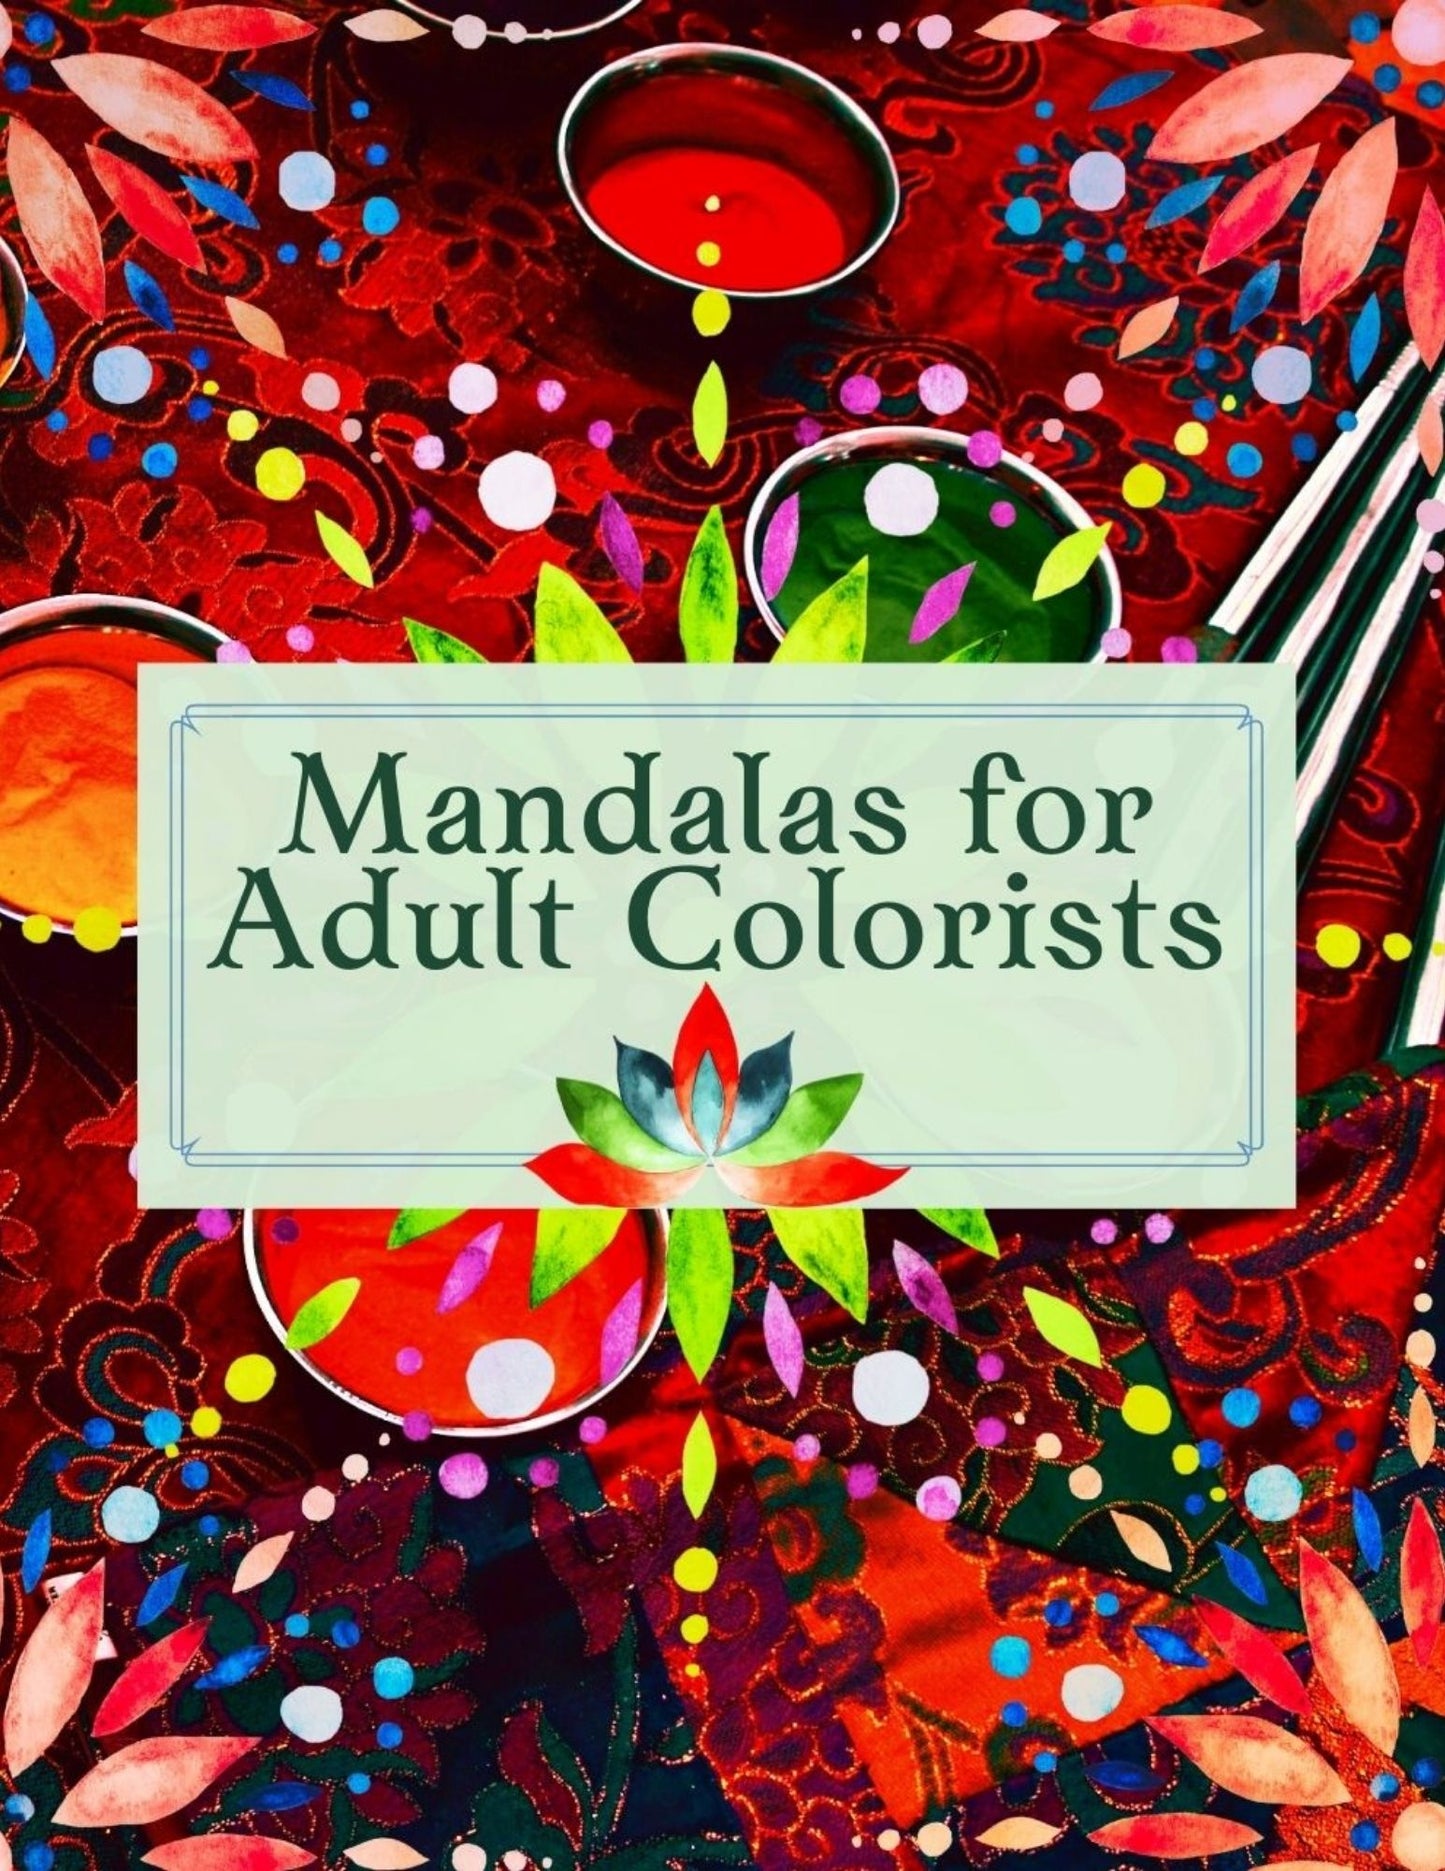 Over 100 Mandalas for Colorists Living Life While Incorporating Mindful Relaxation Techniques: A DonnaInk Publications 100 Plus Clipart Self-Help Creativity Mandala Book for Colorists